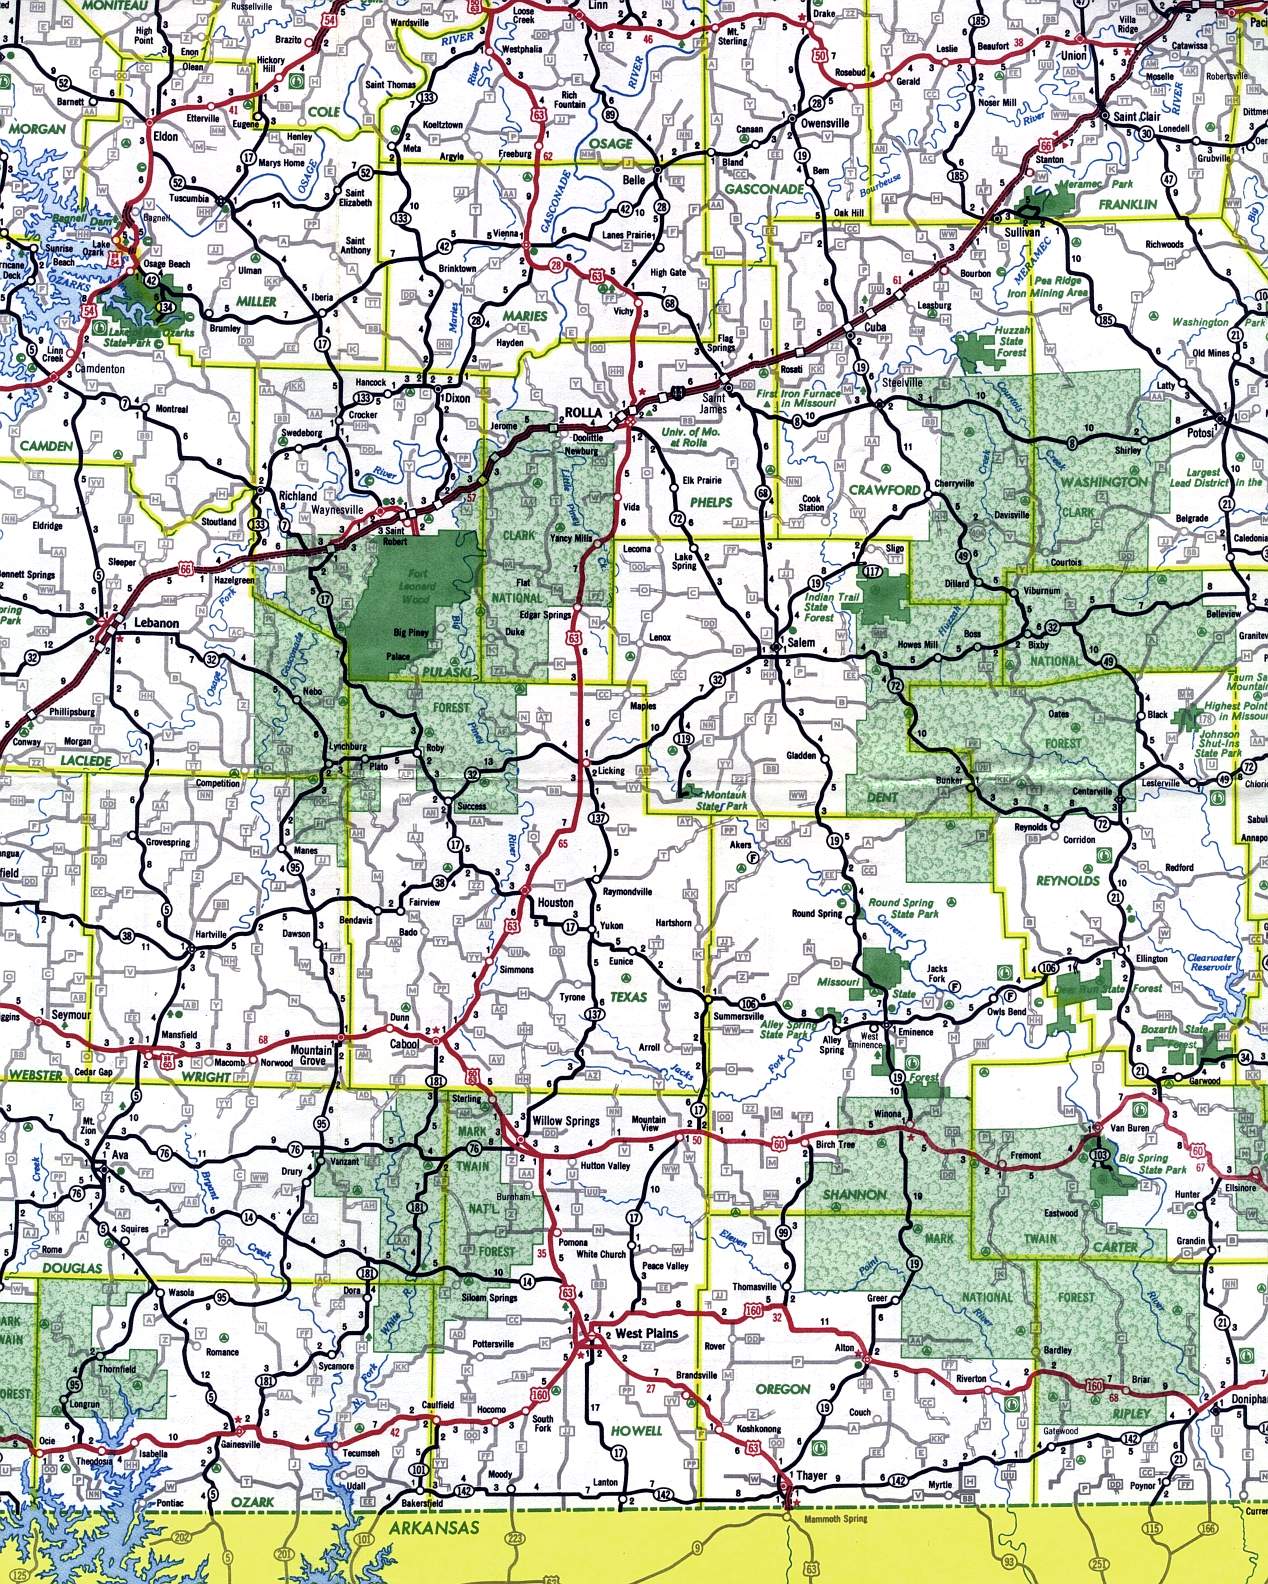 Southwest-central section of Missouri from 1969 official highway map